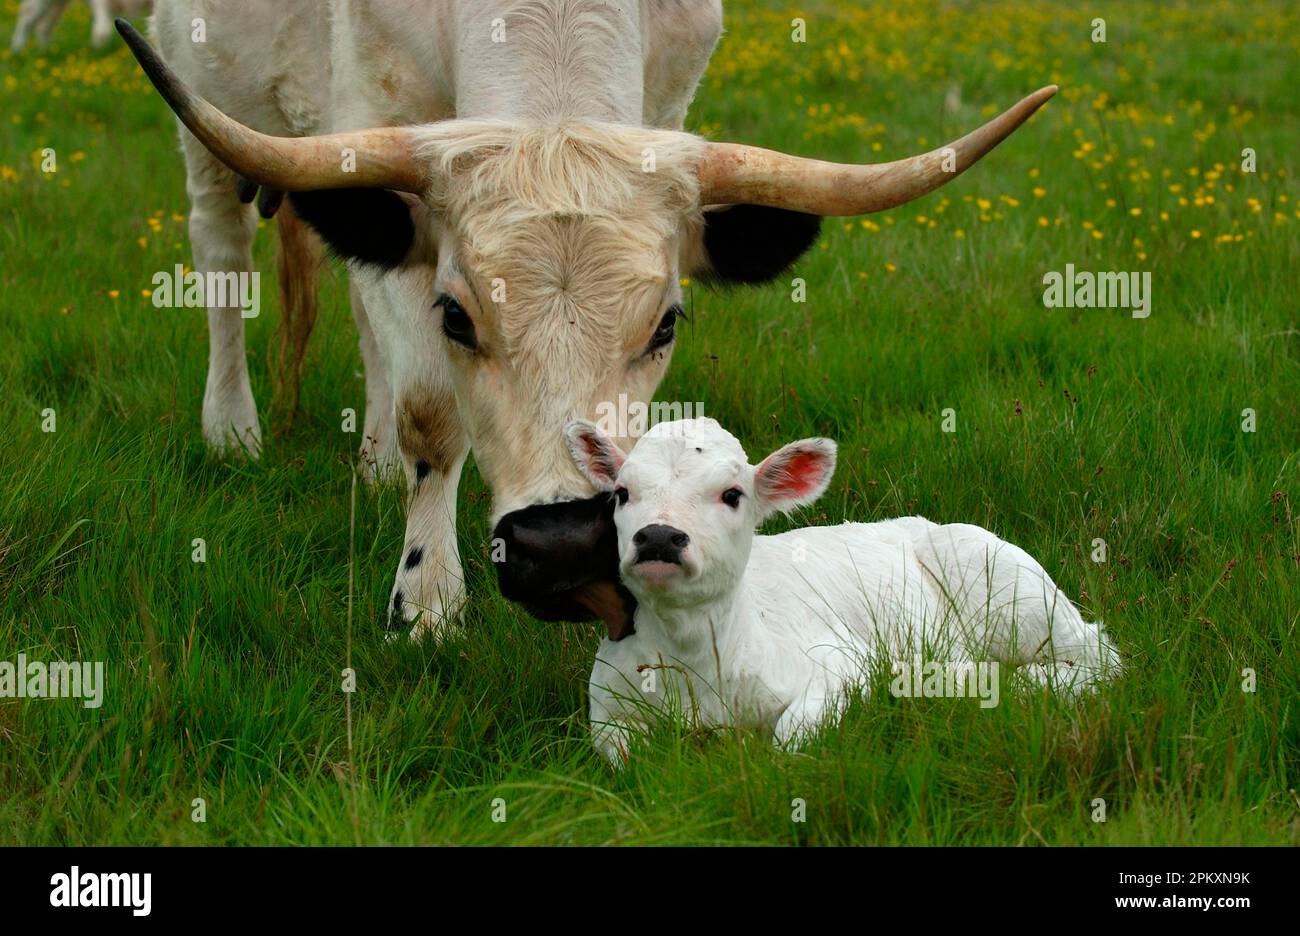 White Park Cattle, newborn calf being licked by mother, Berkshire, England, United Kingdom Stock Photo